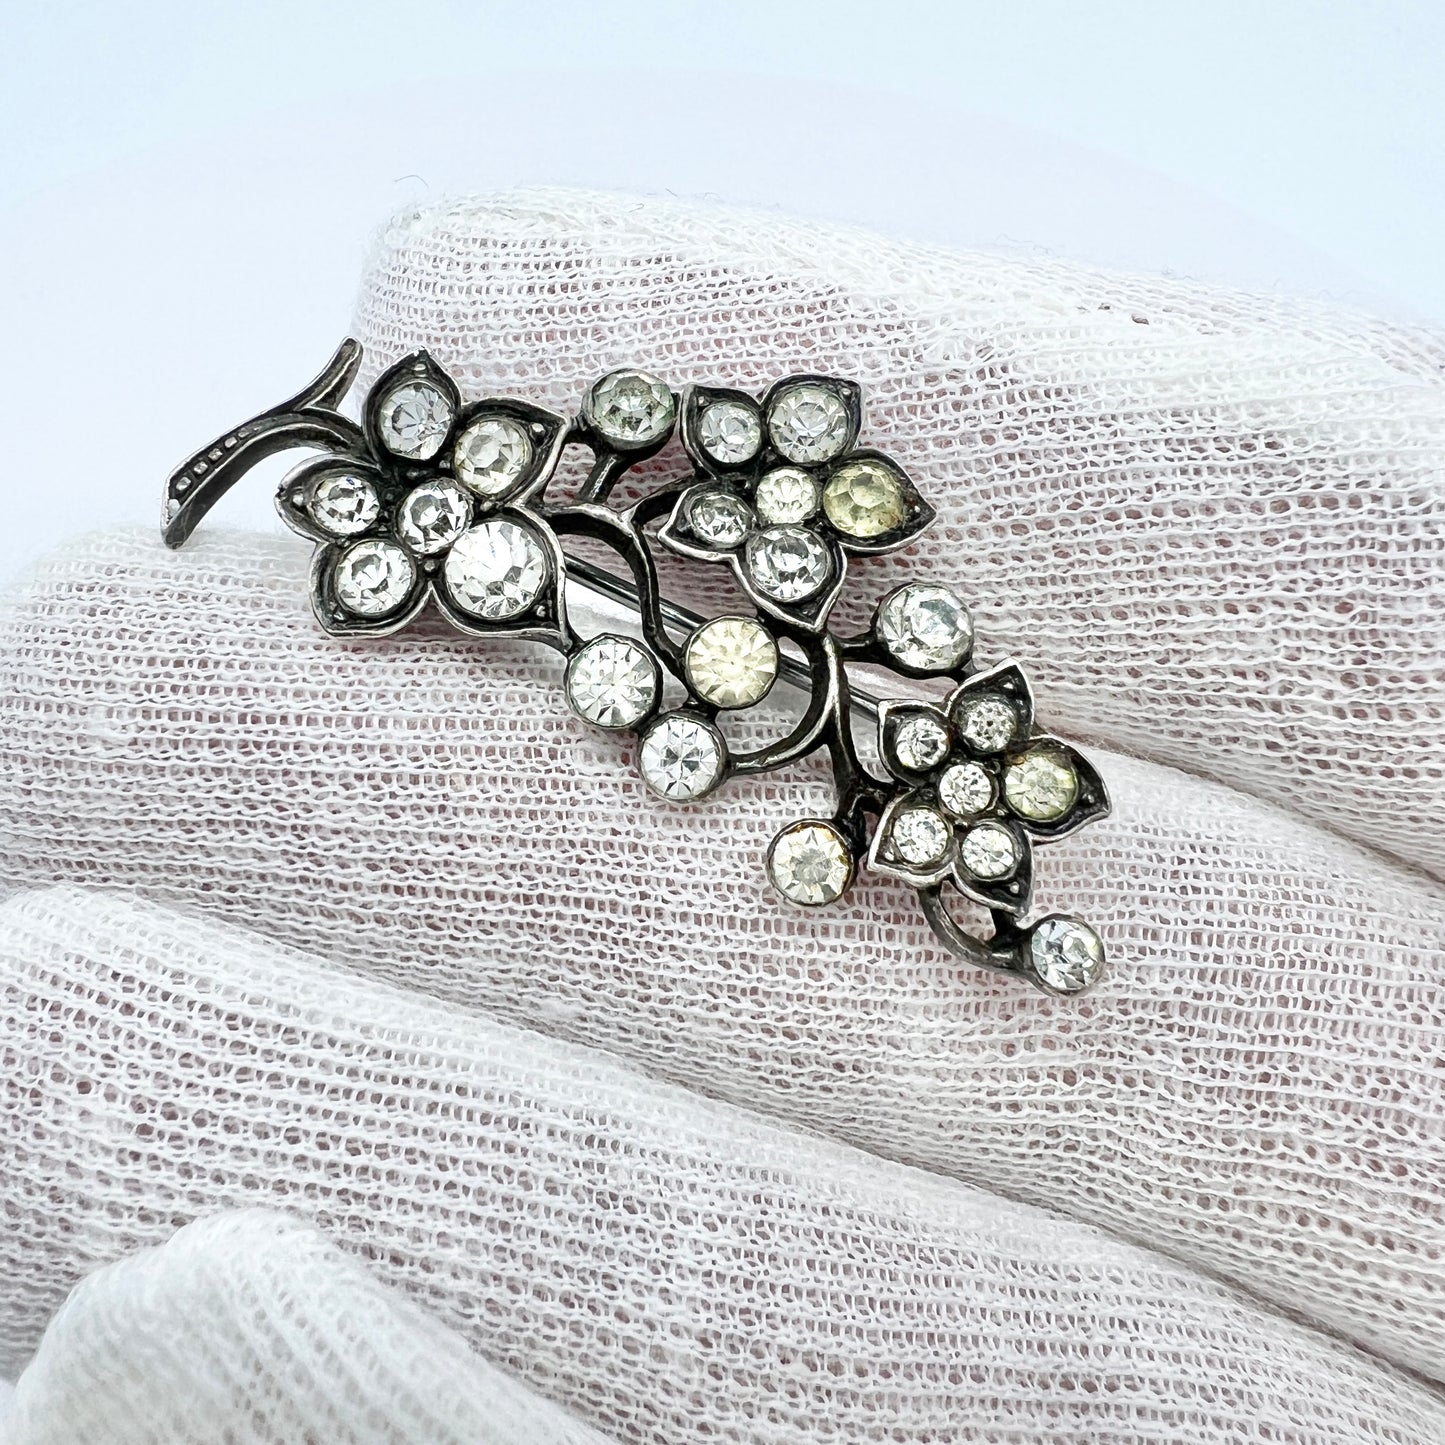 Knoll & Pregizer, Germany early 1900s. Solid Silver Paste Brooch.